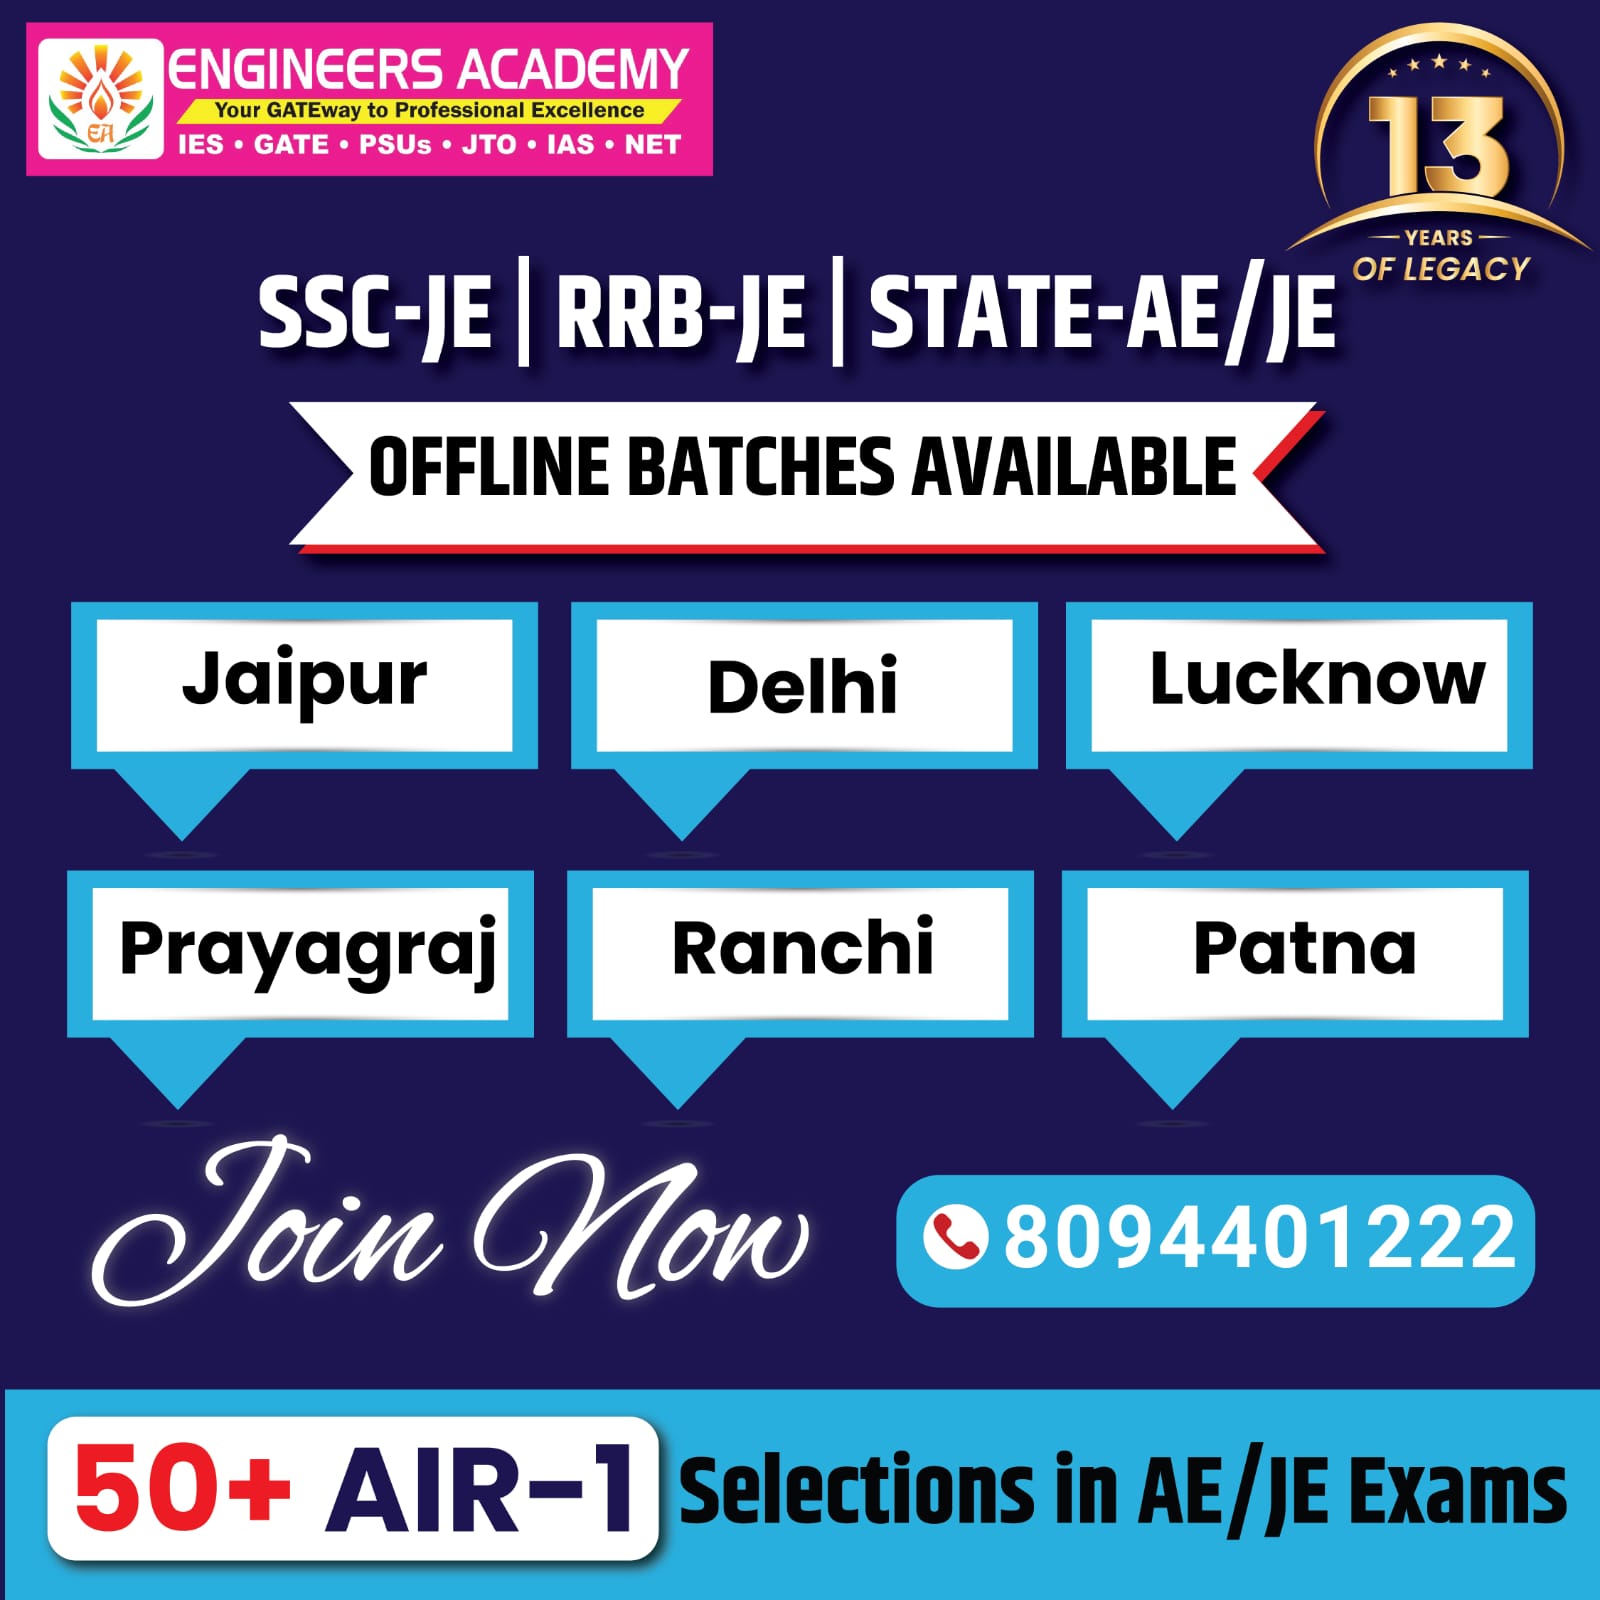 SSC JE, RRB JE, State-AE/JE Coaching